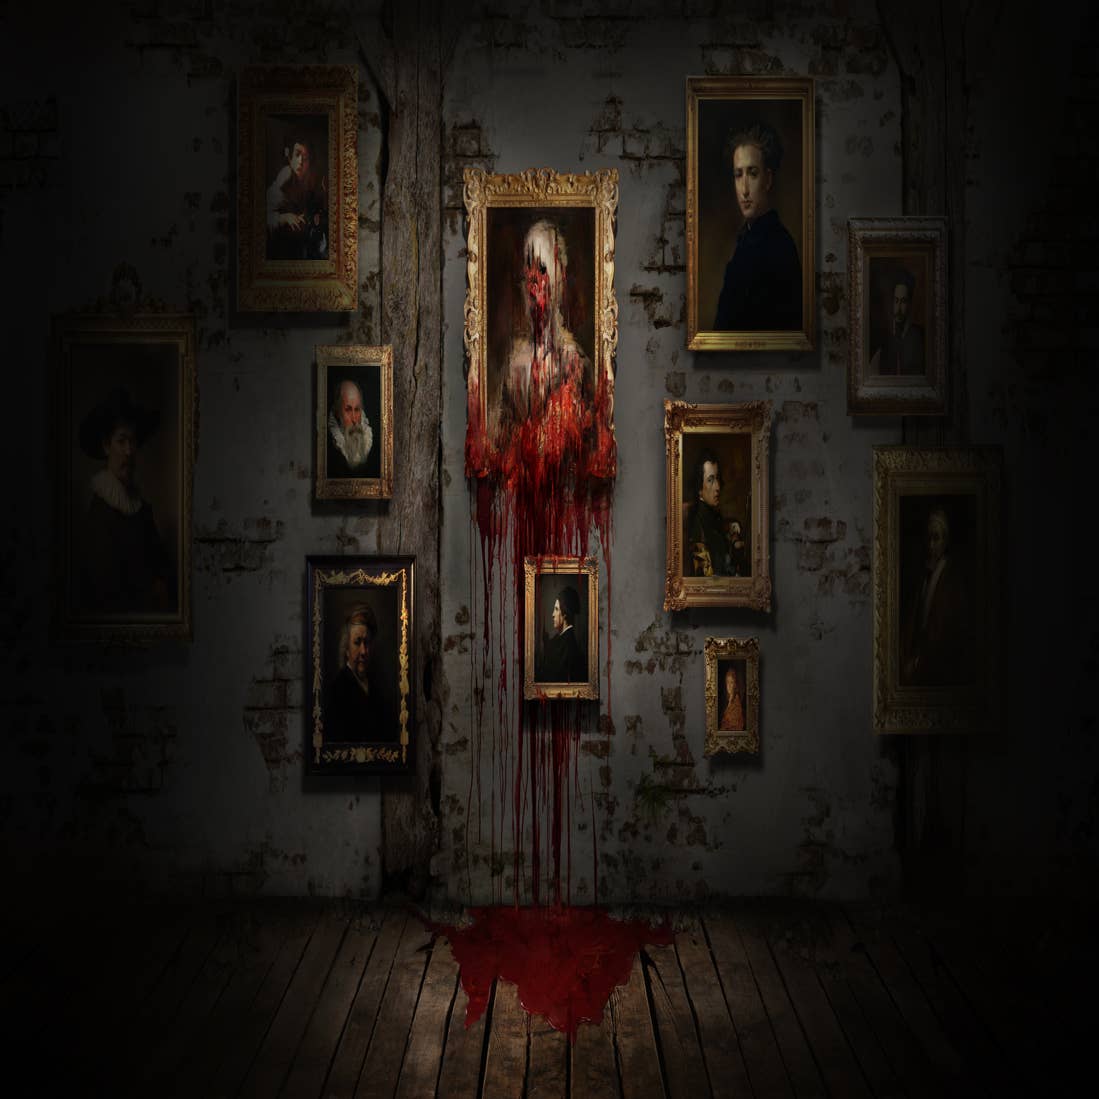 Layers of Fear brings psychedelic horror to Xbox One today